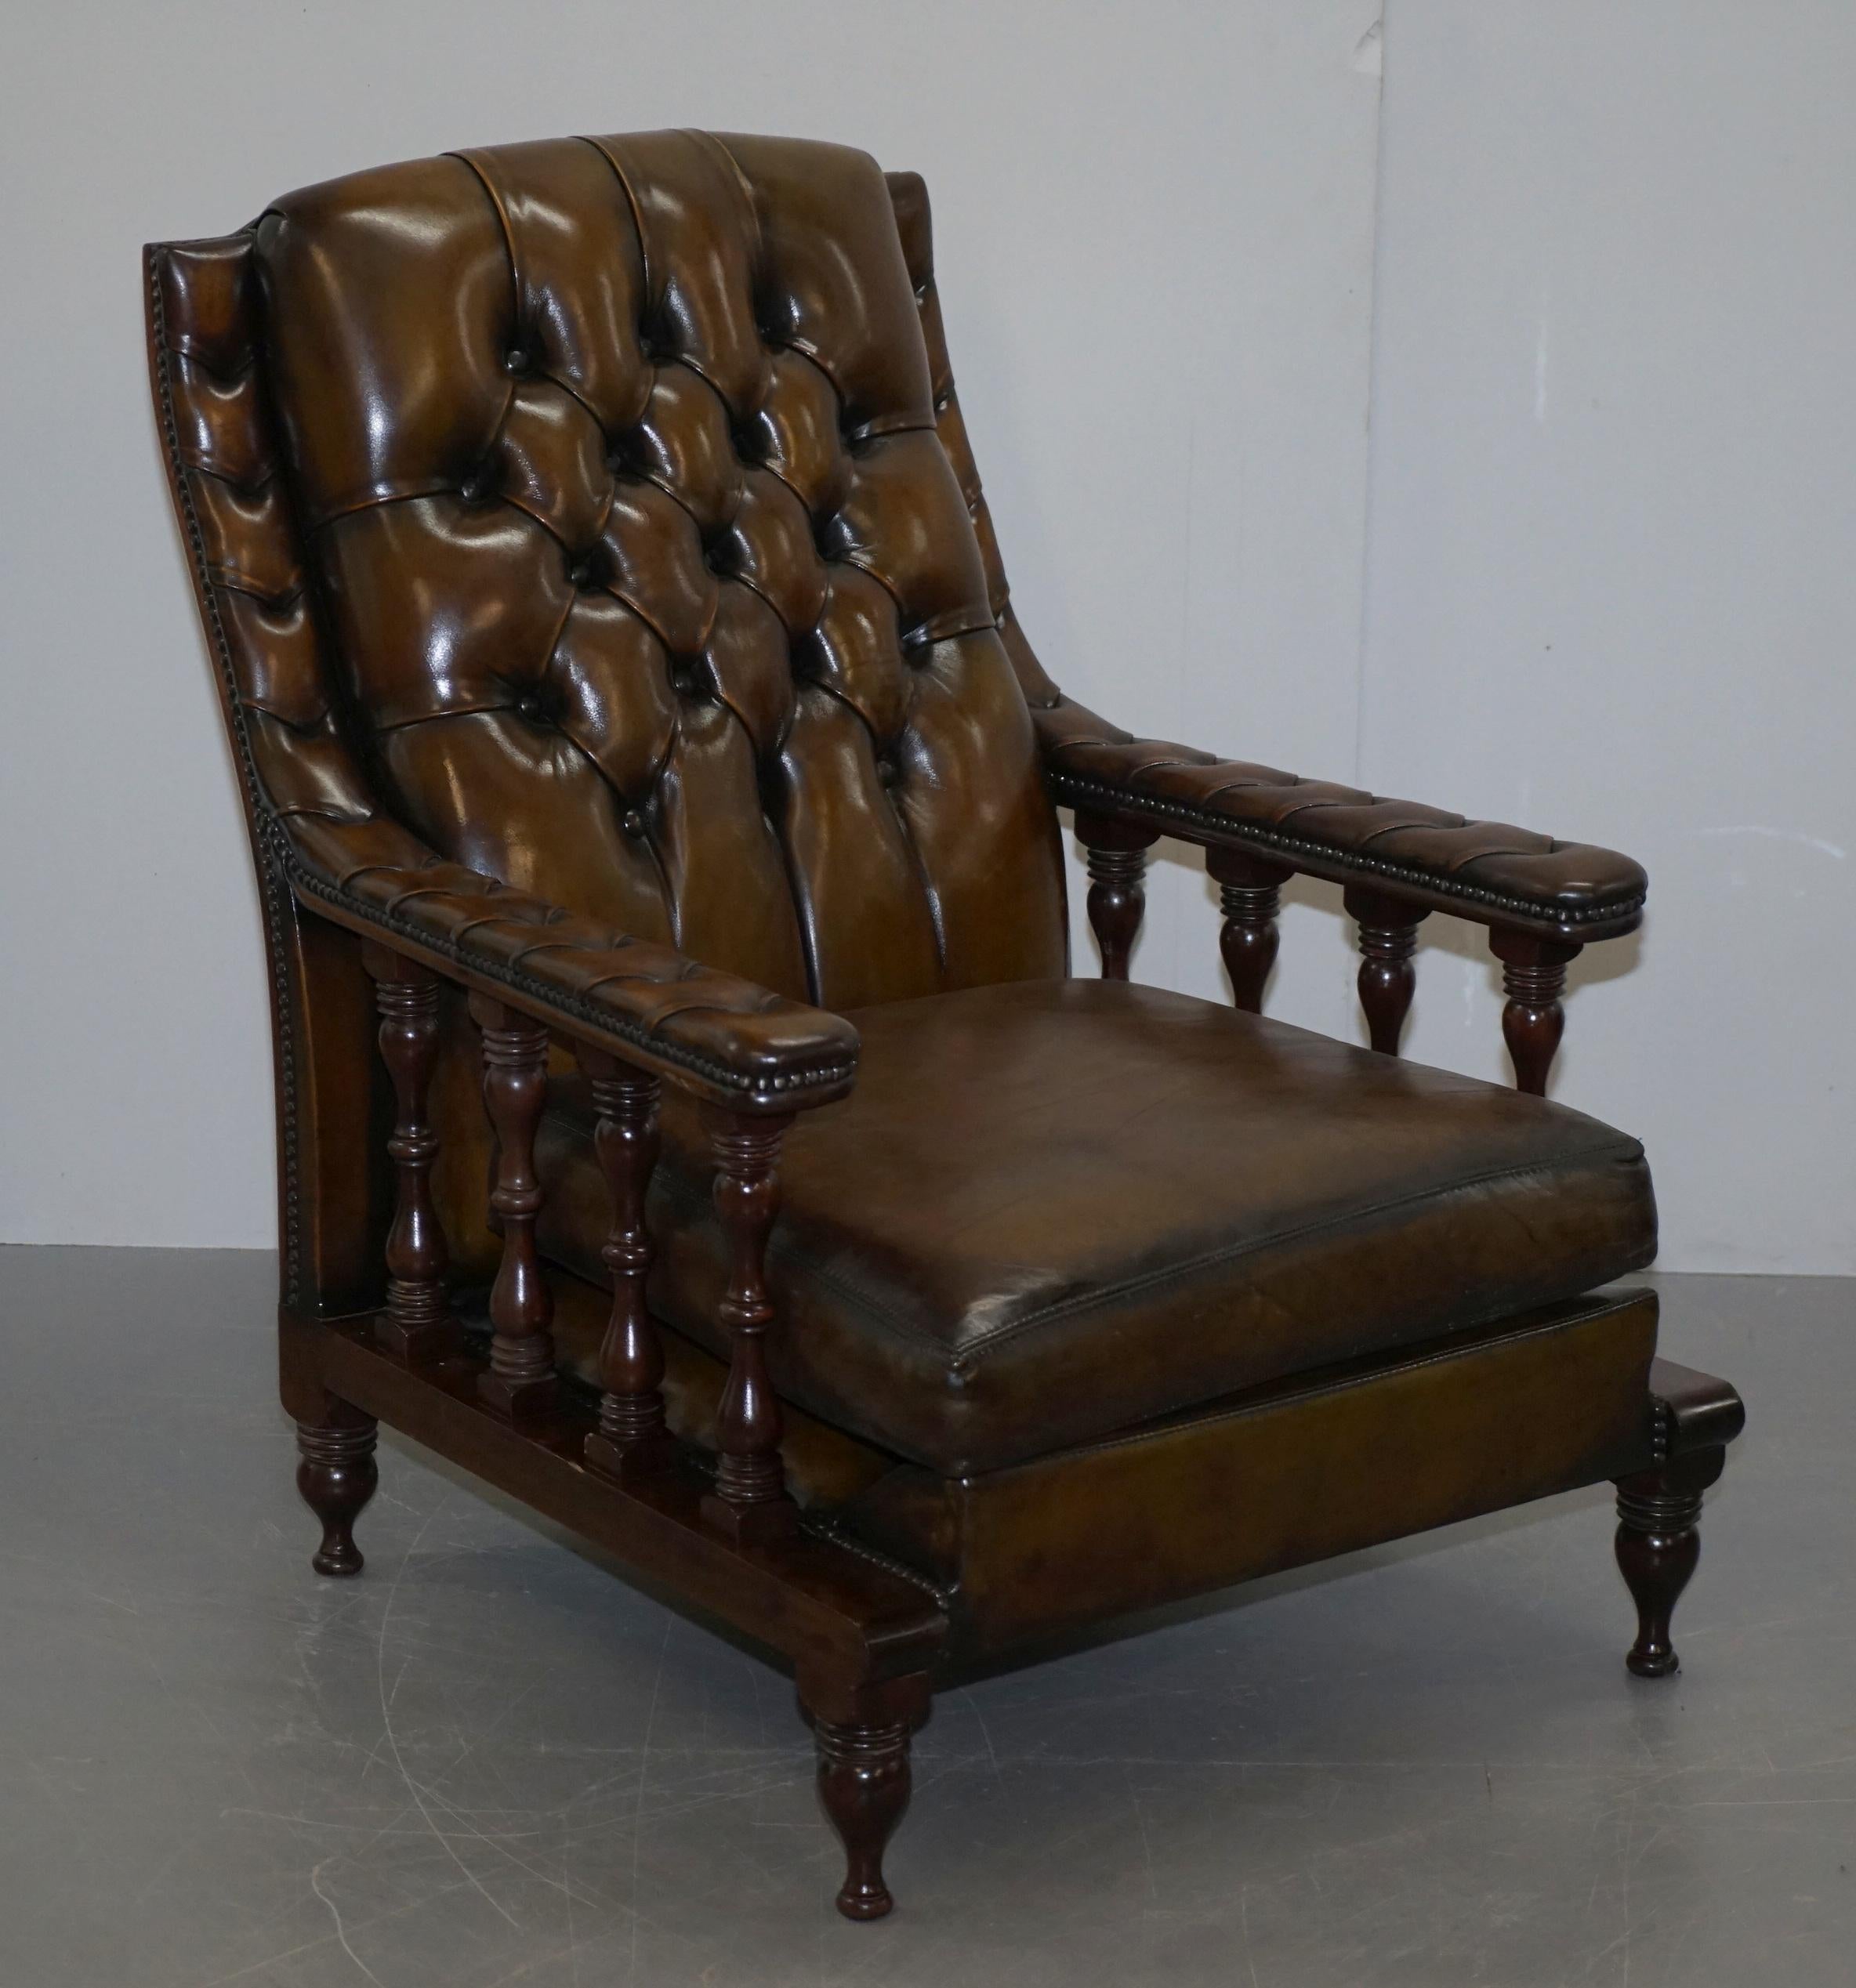 We are delighted to offer for sale this lovely pair of Chesterfield Dutch hand dyed fully restored Cigar Brown leather library reading armchairs

A good looking and decorative pair, the leather has been refurbished, it has a lovely Victorian